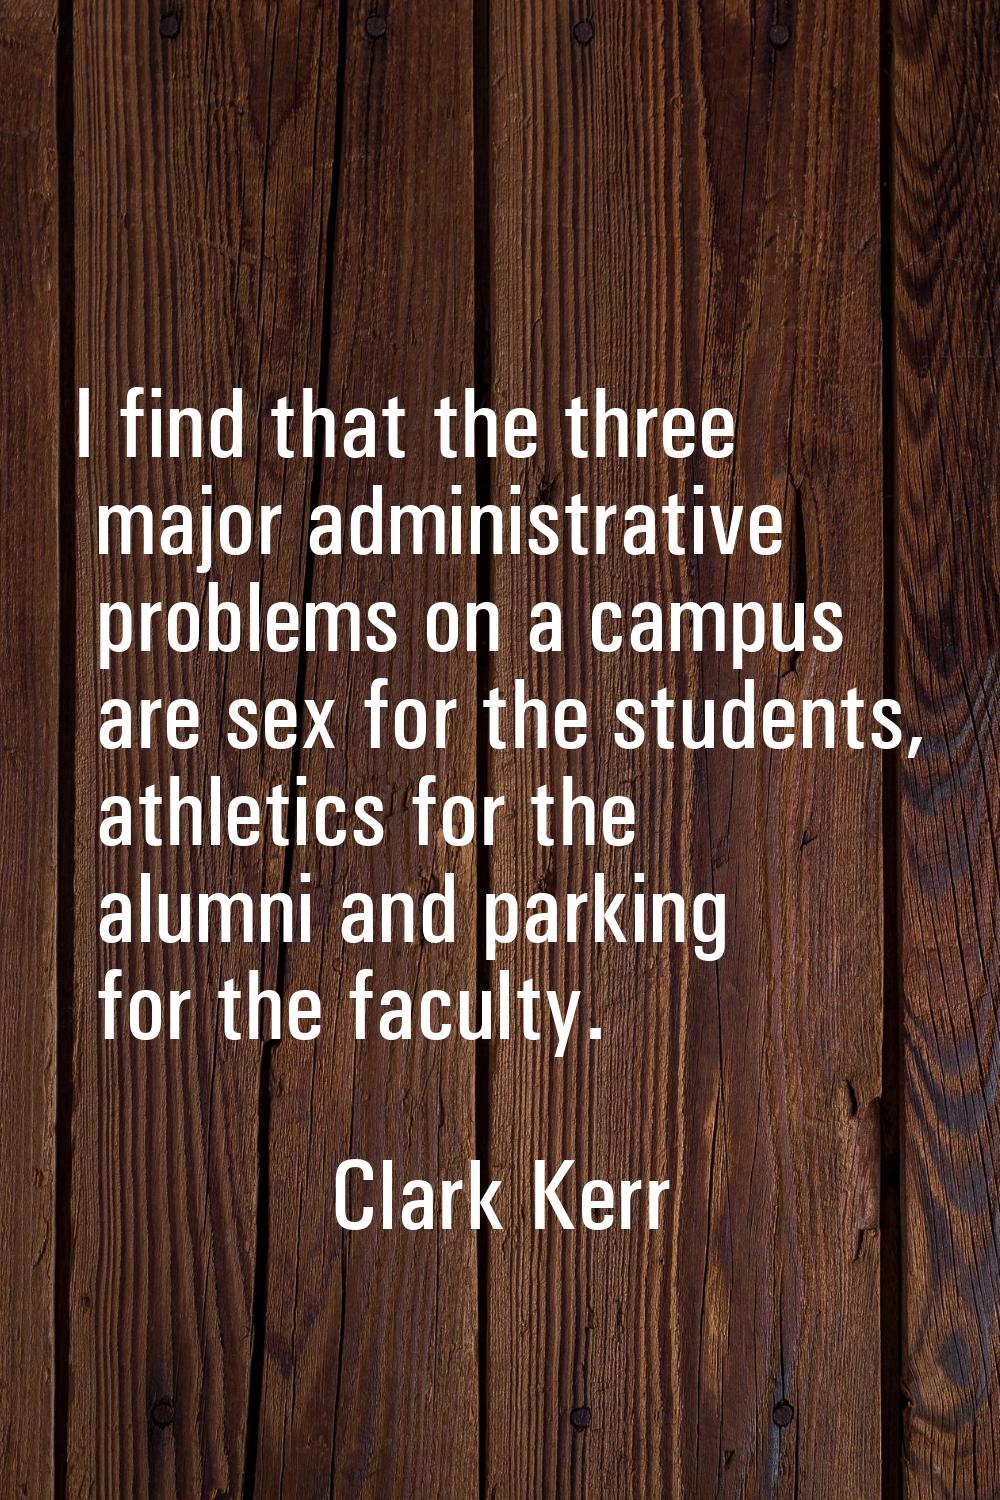 I find that the three major administrative problems on a campus are sex for the students, athletics